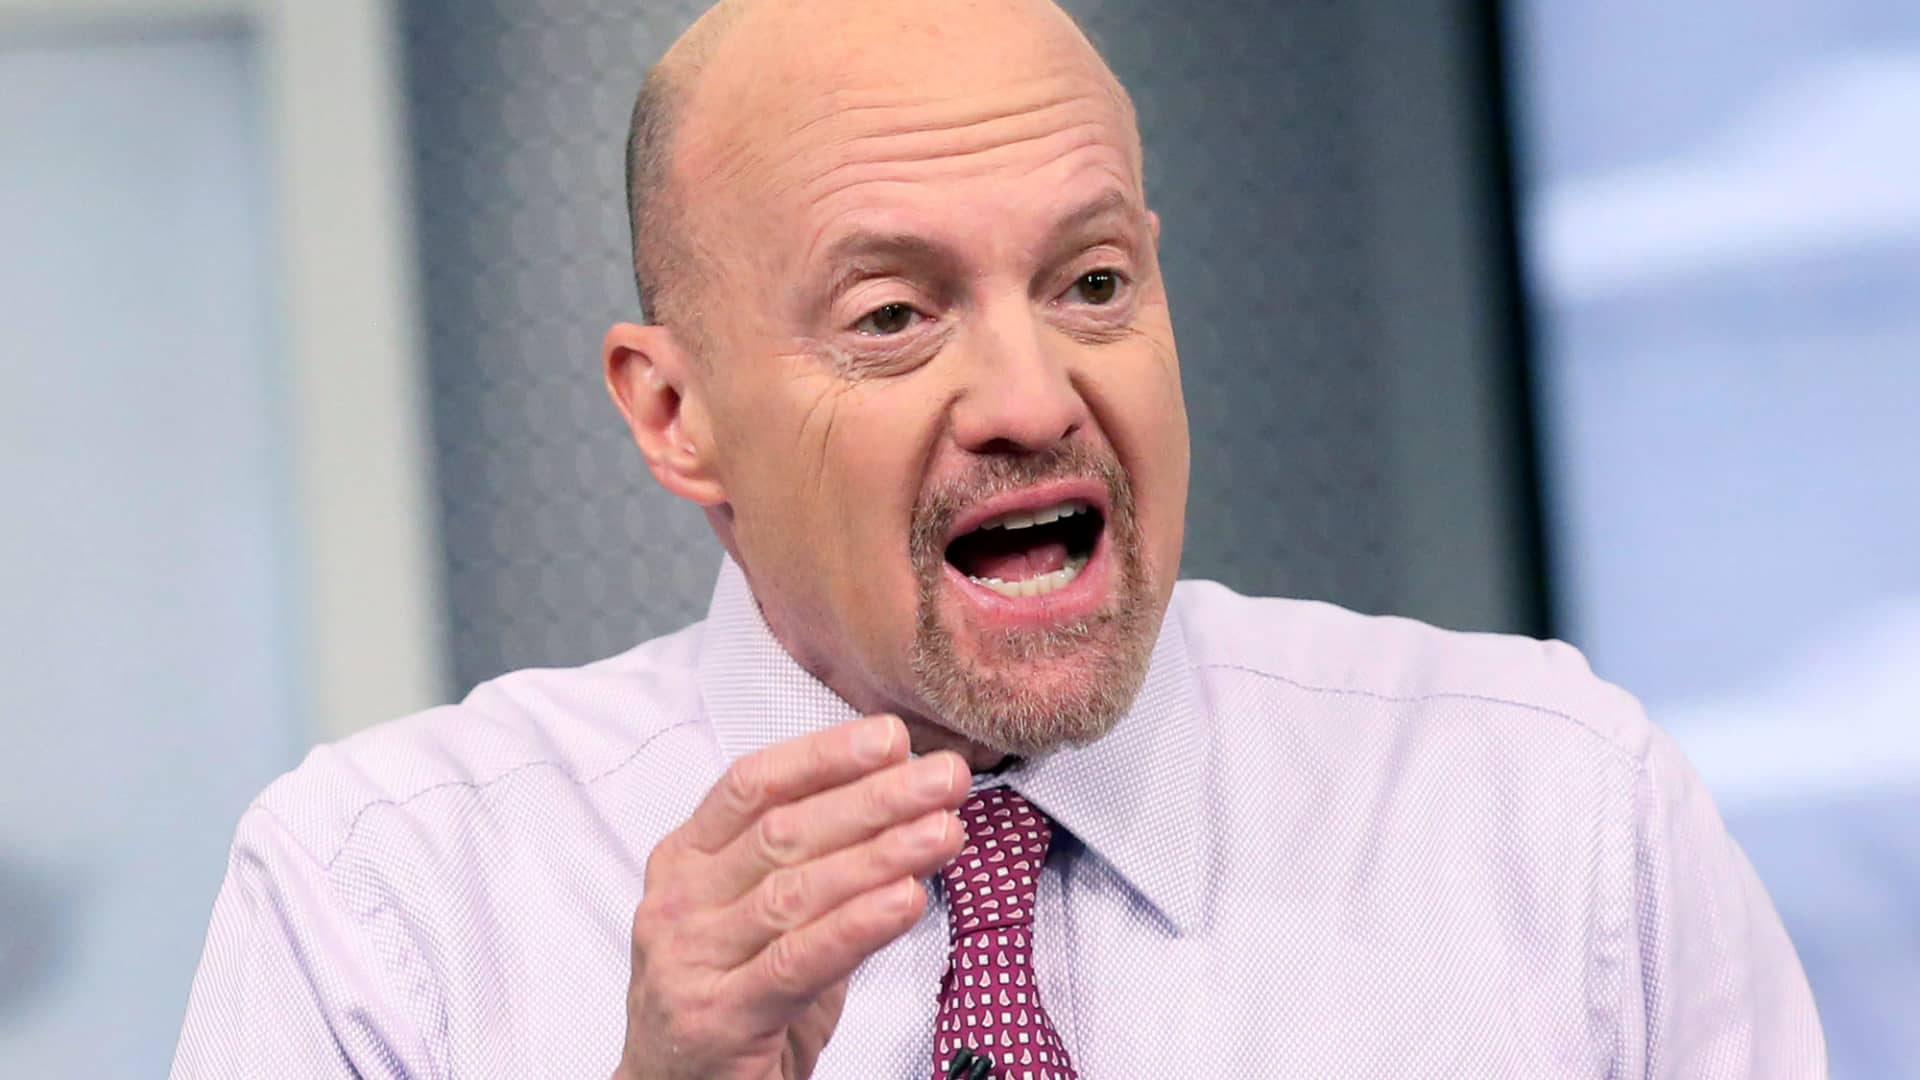 Charts suggest inflation could soon come down ‘substantially,’ Jim Cramer says